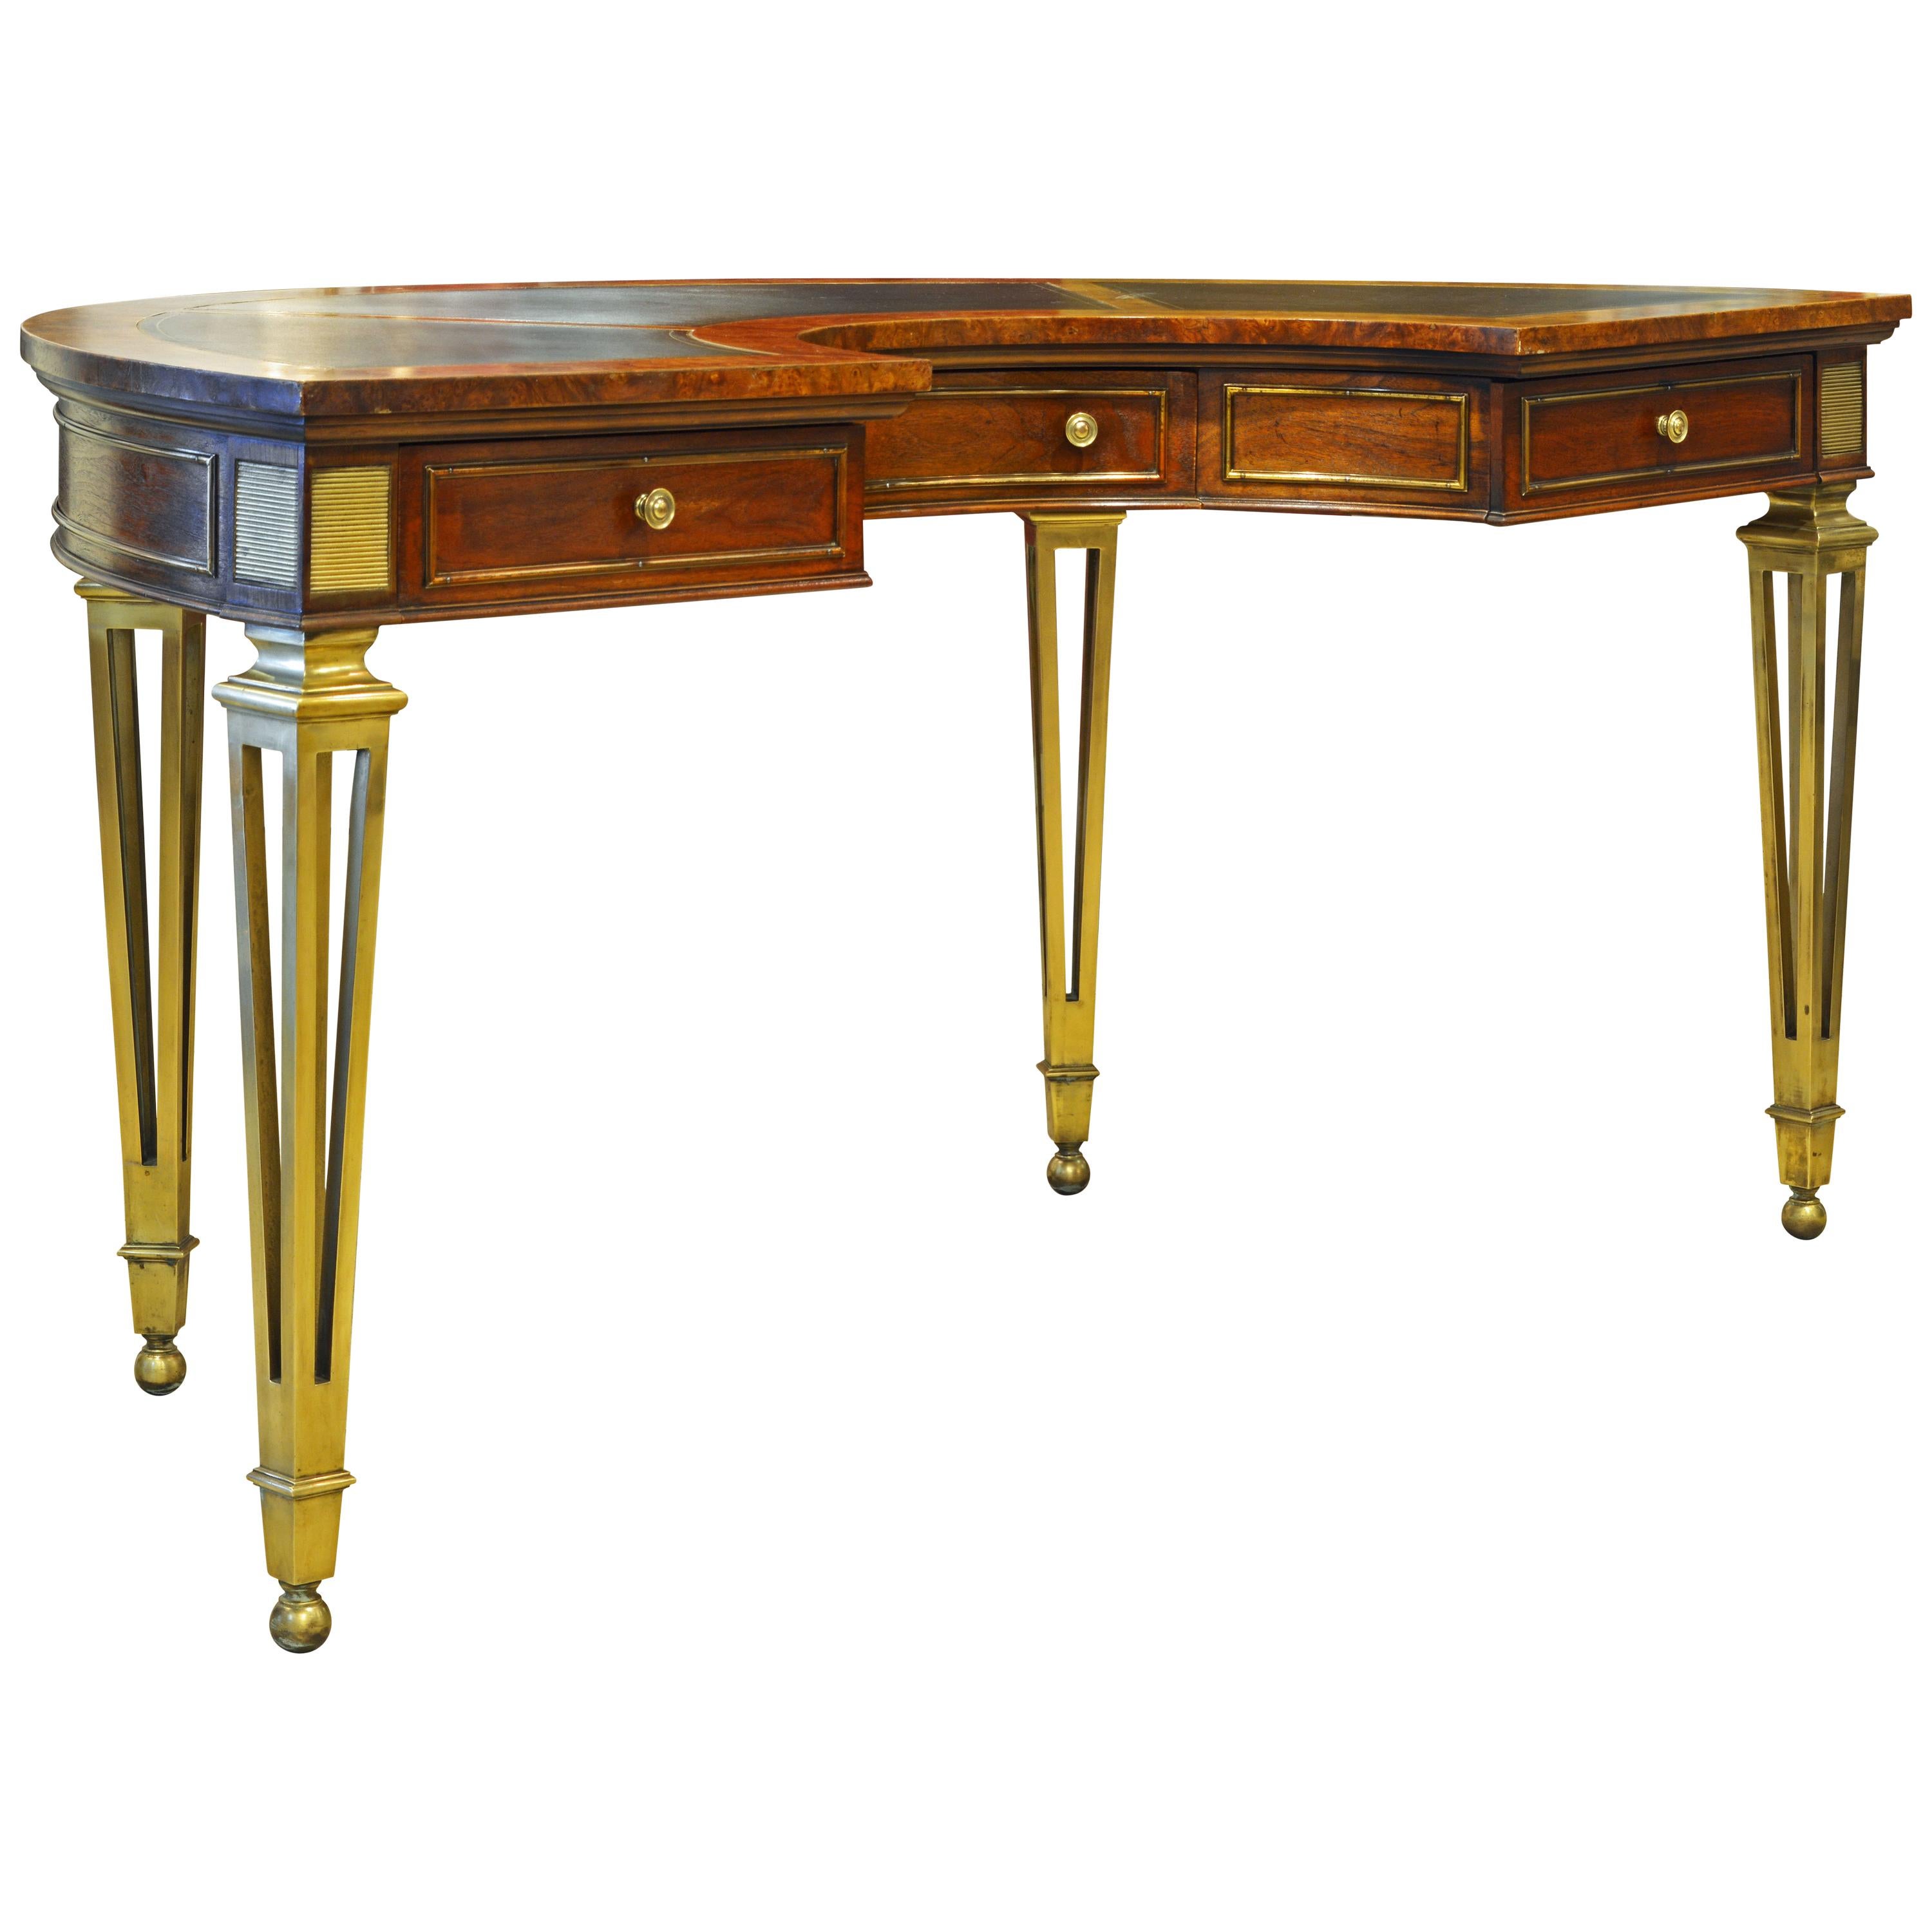 Exceptional Midcentury Semi Circular Brass and Burled Wood Desk by Mastercraft